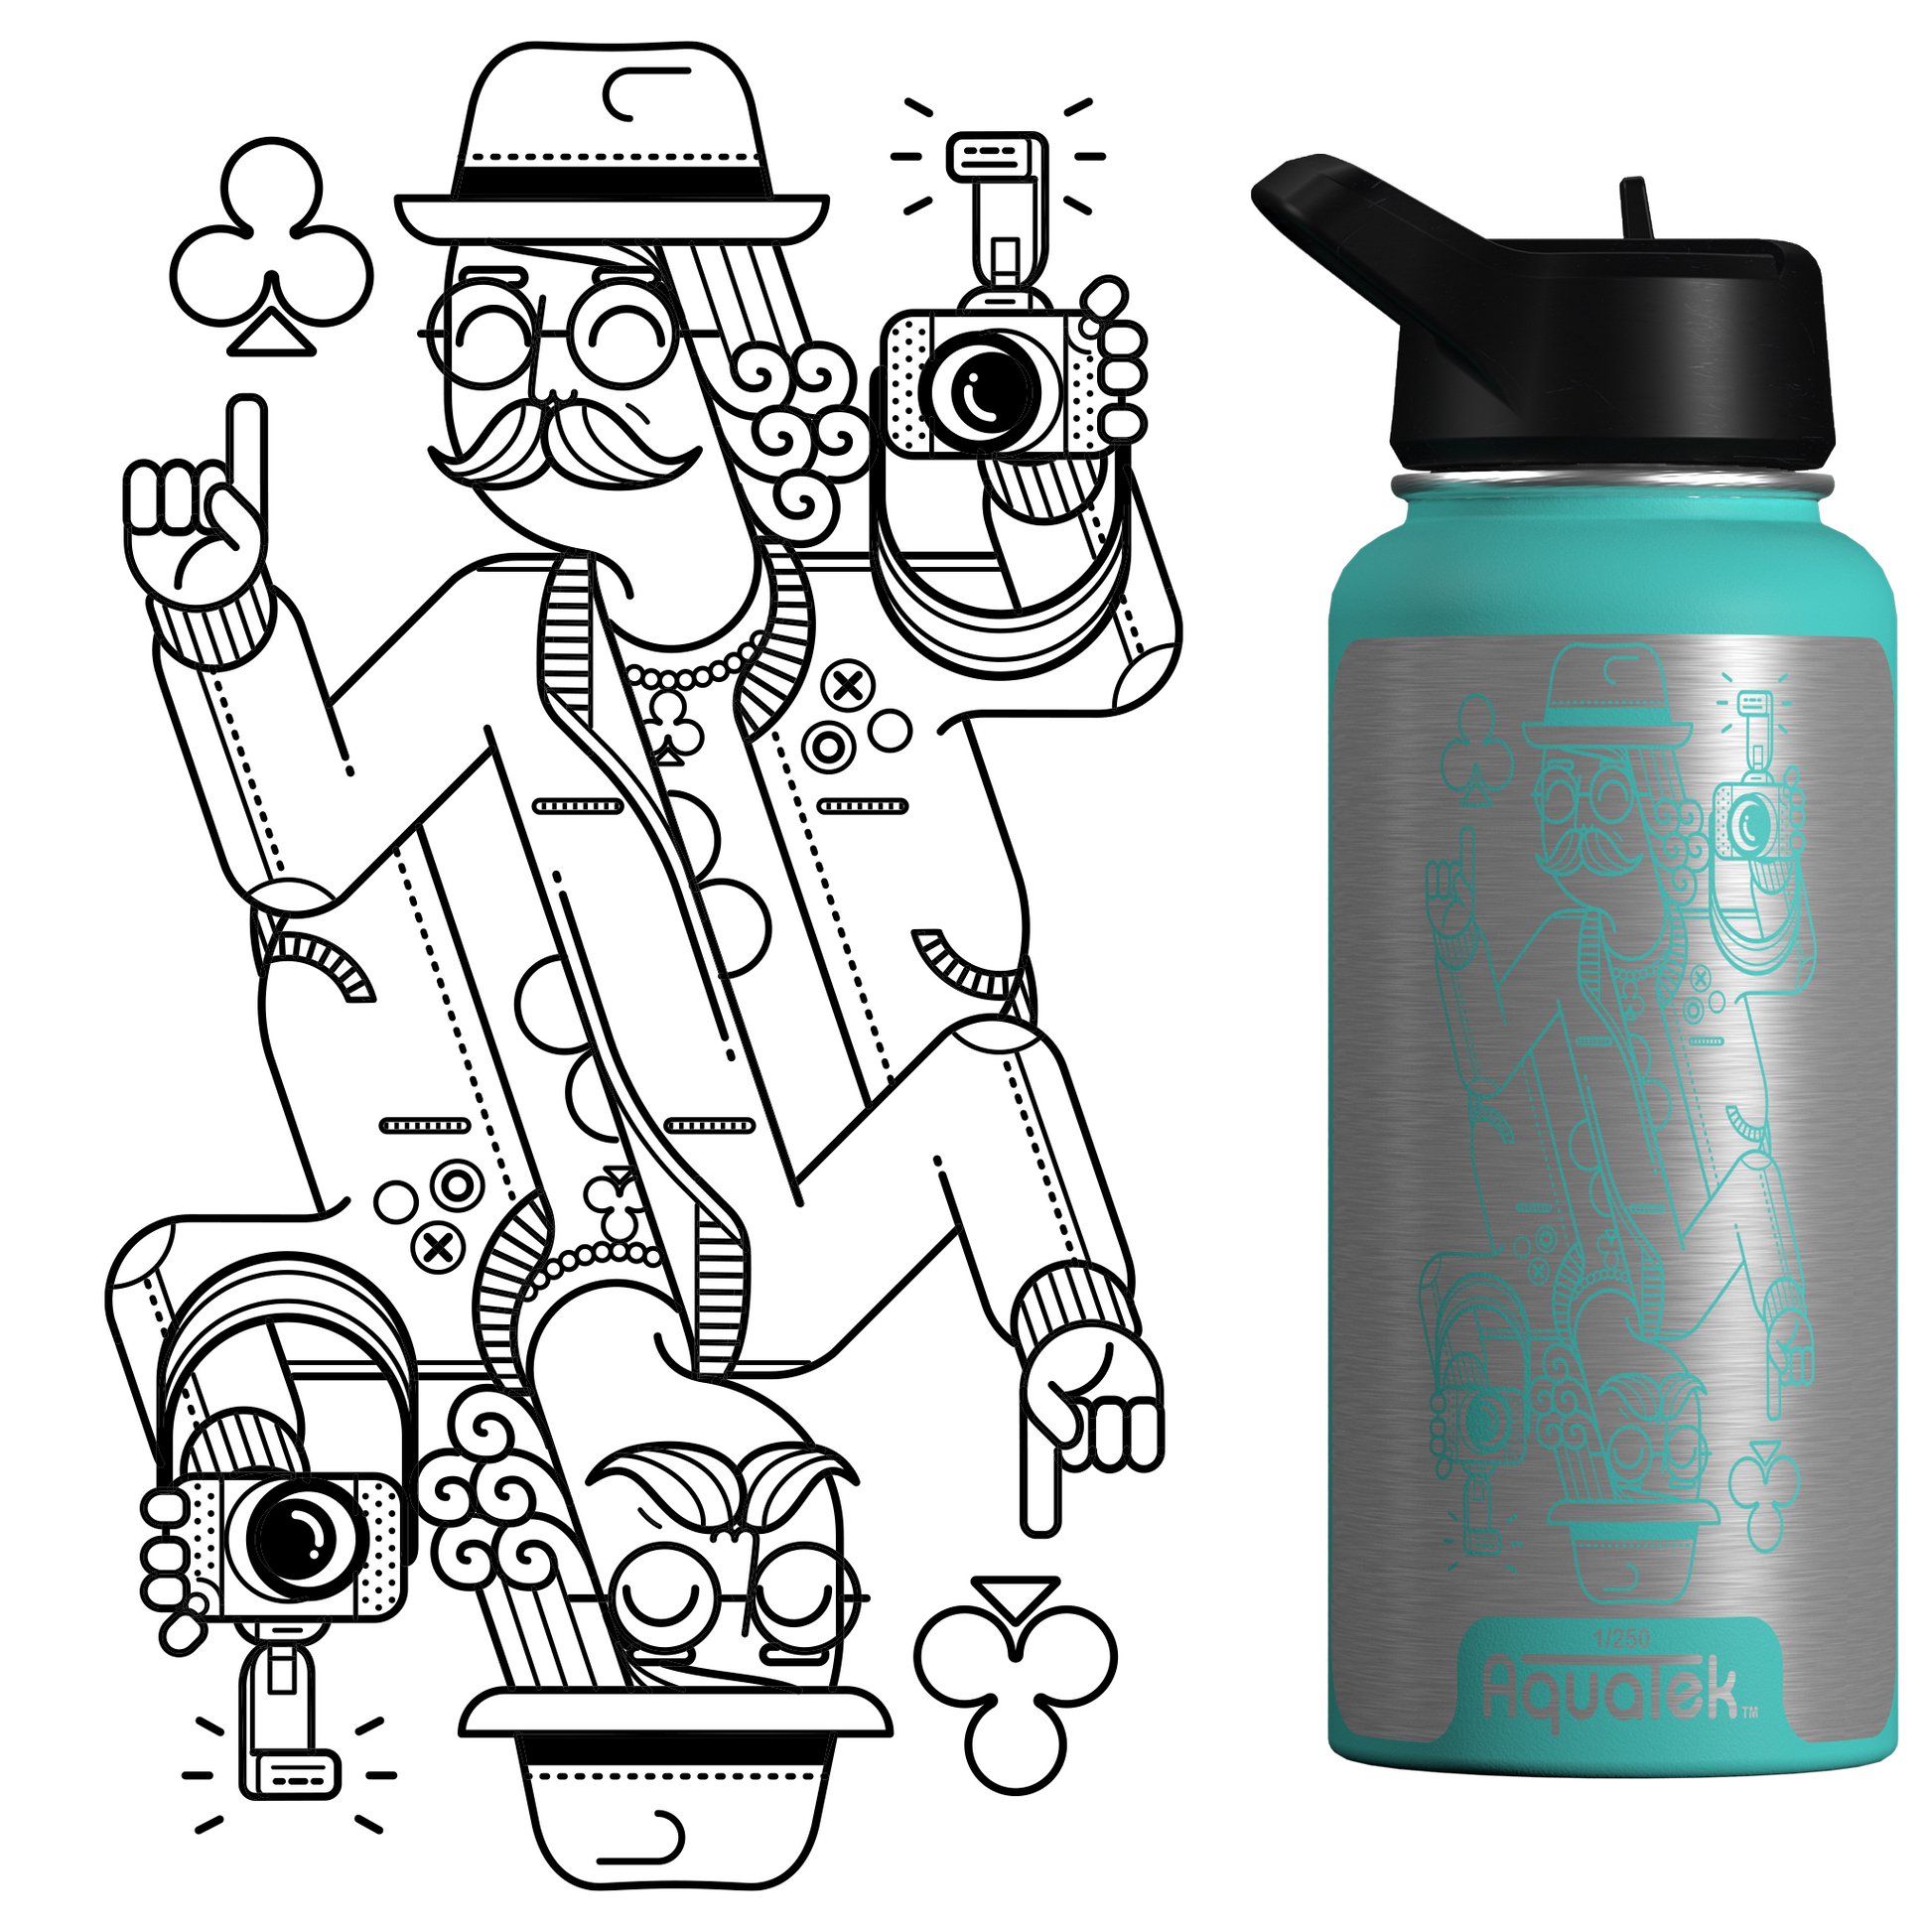 OJACK Water Bottle Holders: Hydration, Learning and Creativity